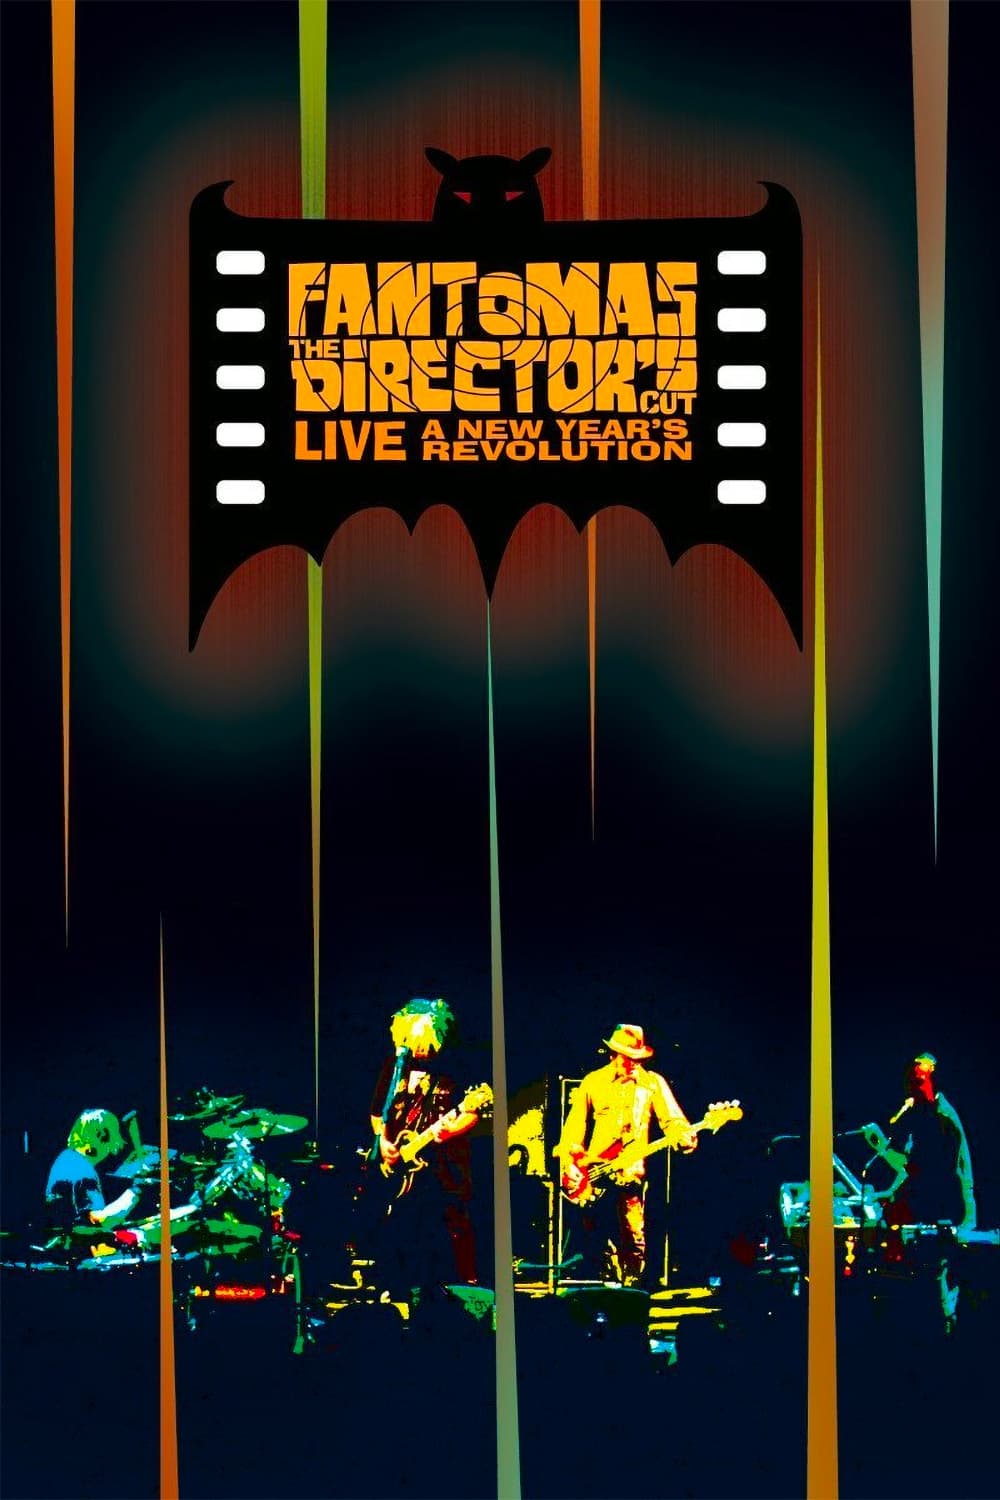 Fantomas: The Director's Cut Live - A New Year's Revolution film